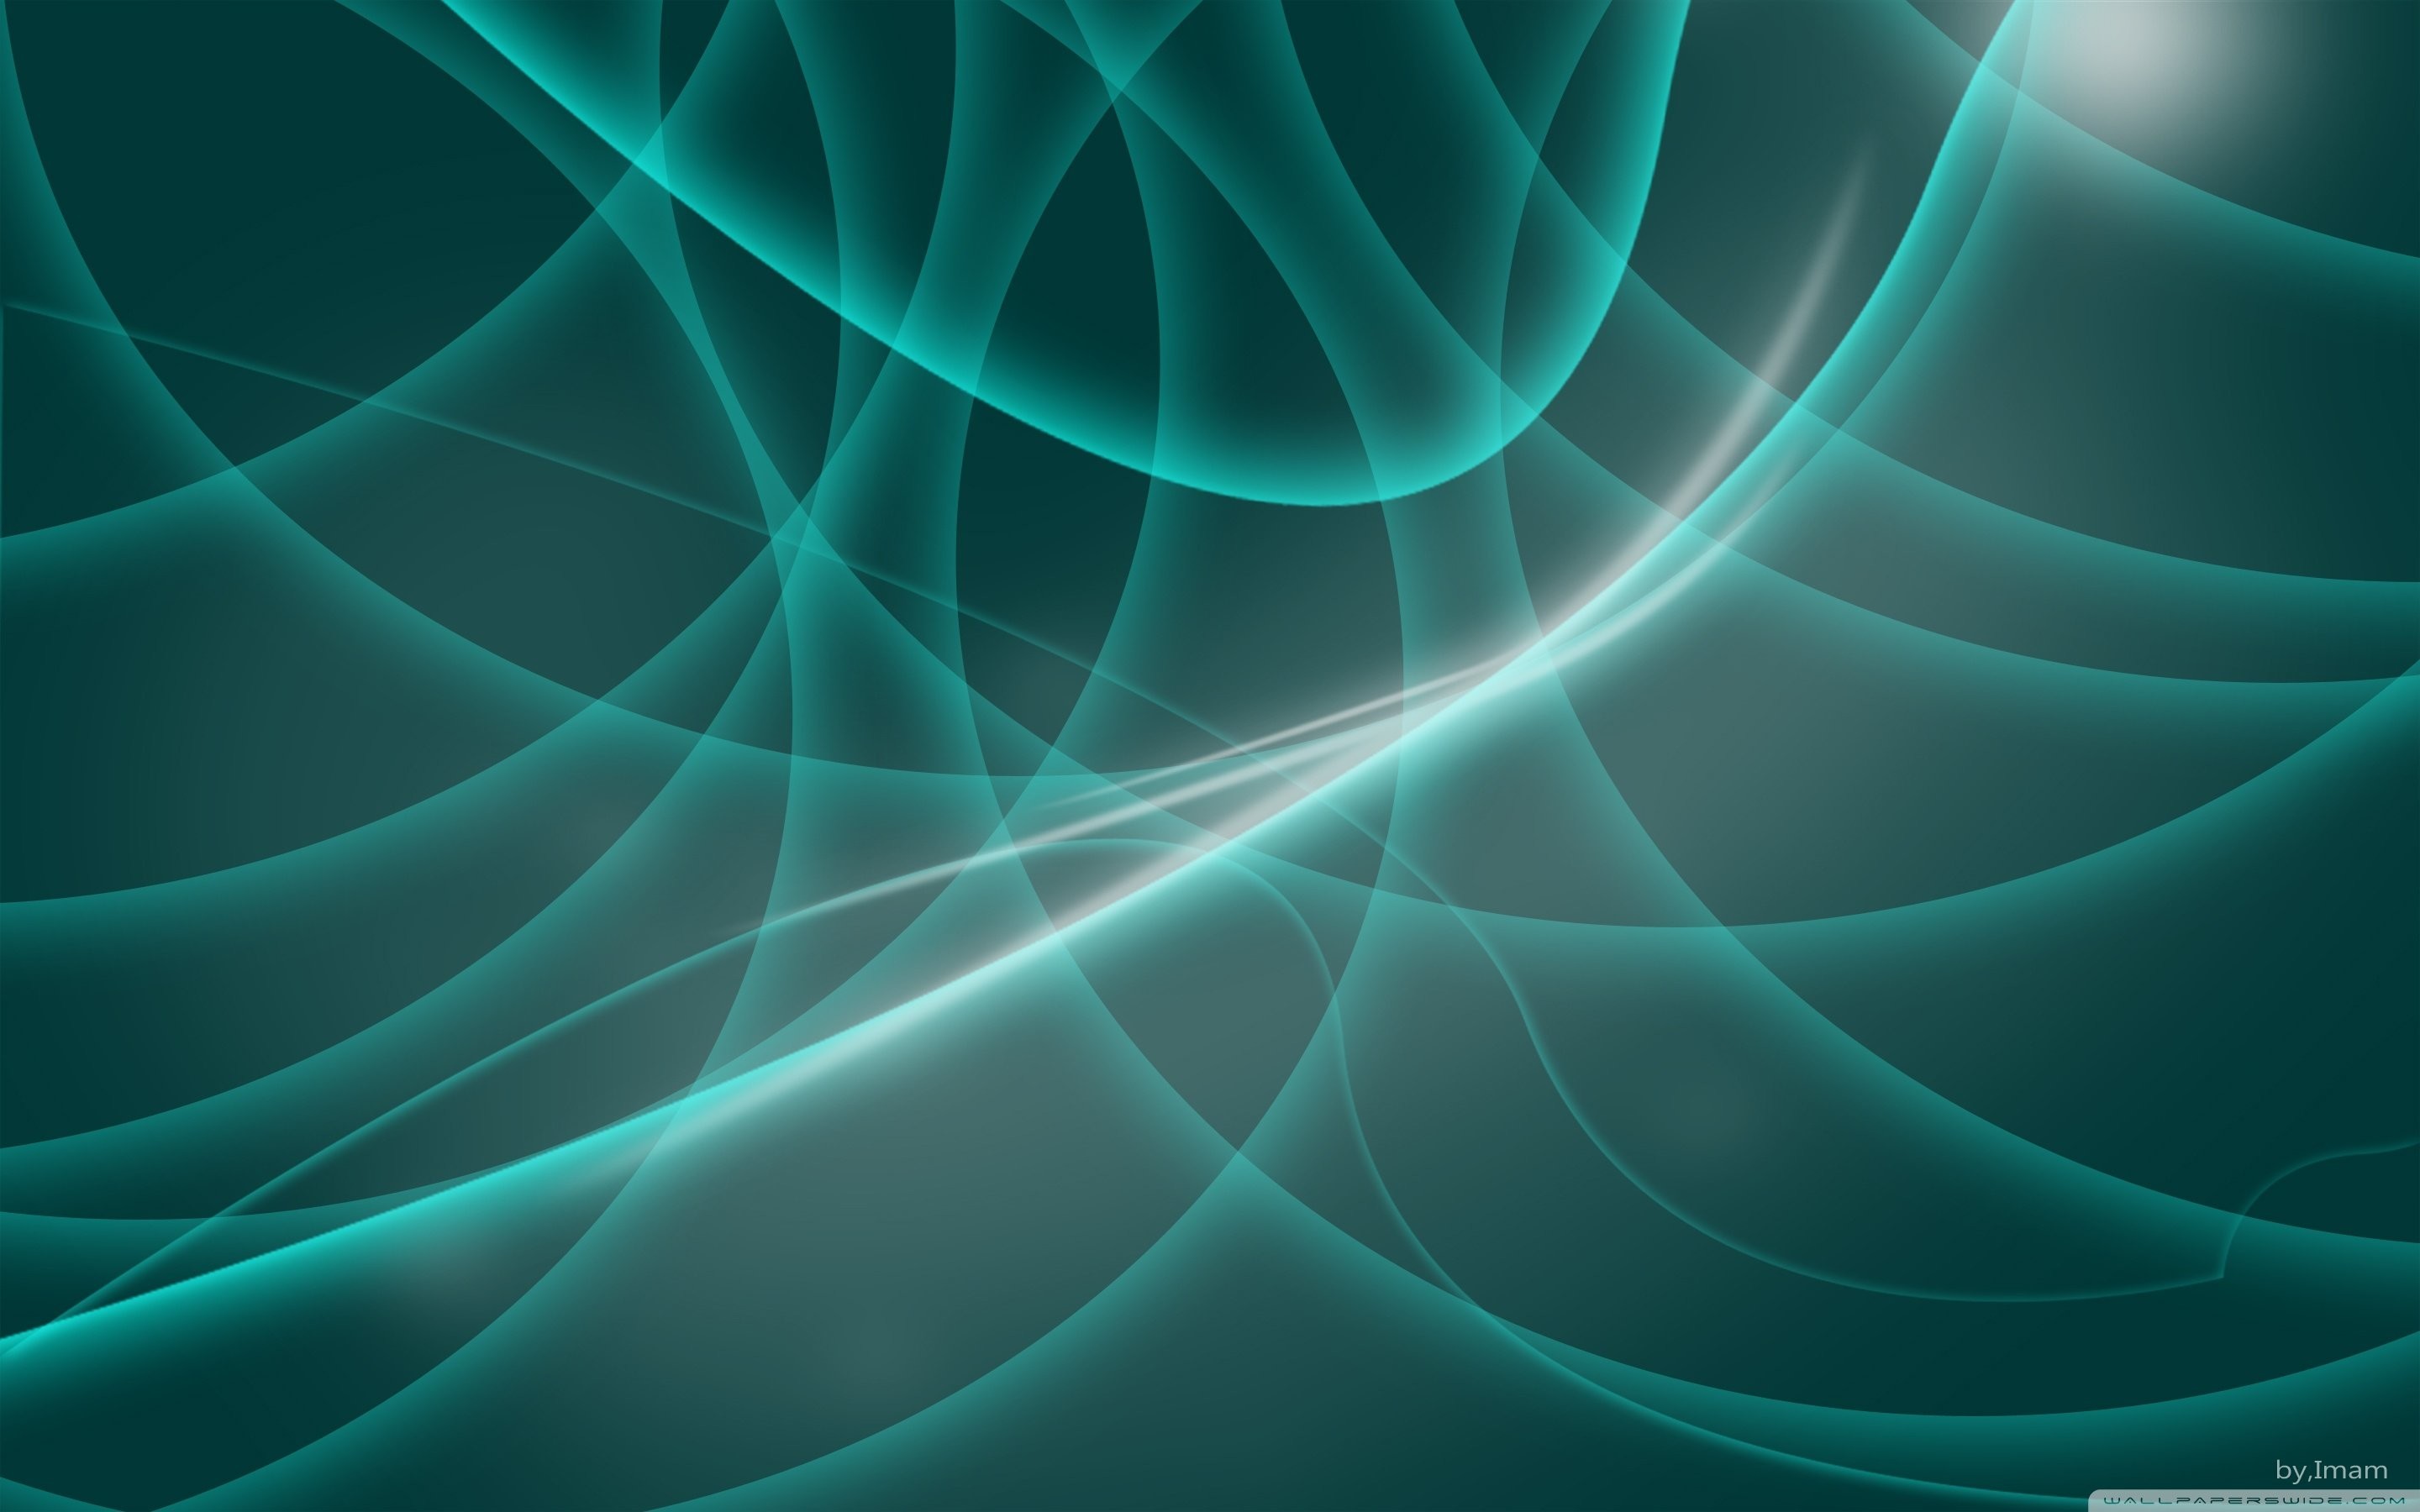 Teal Abstract Background Images  Free Download on Freepik